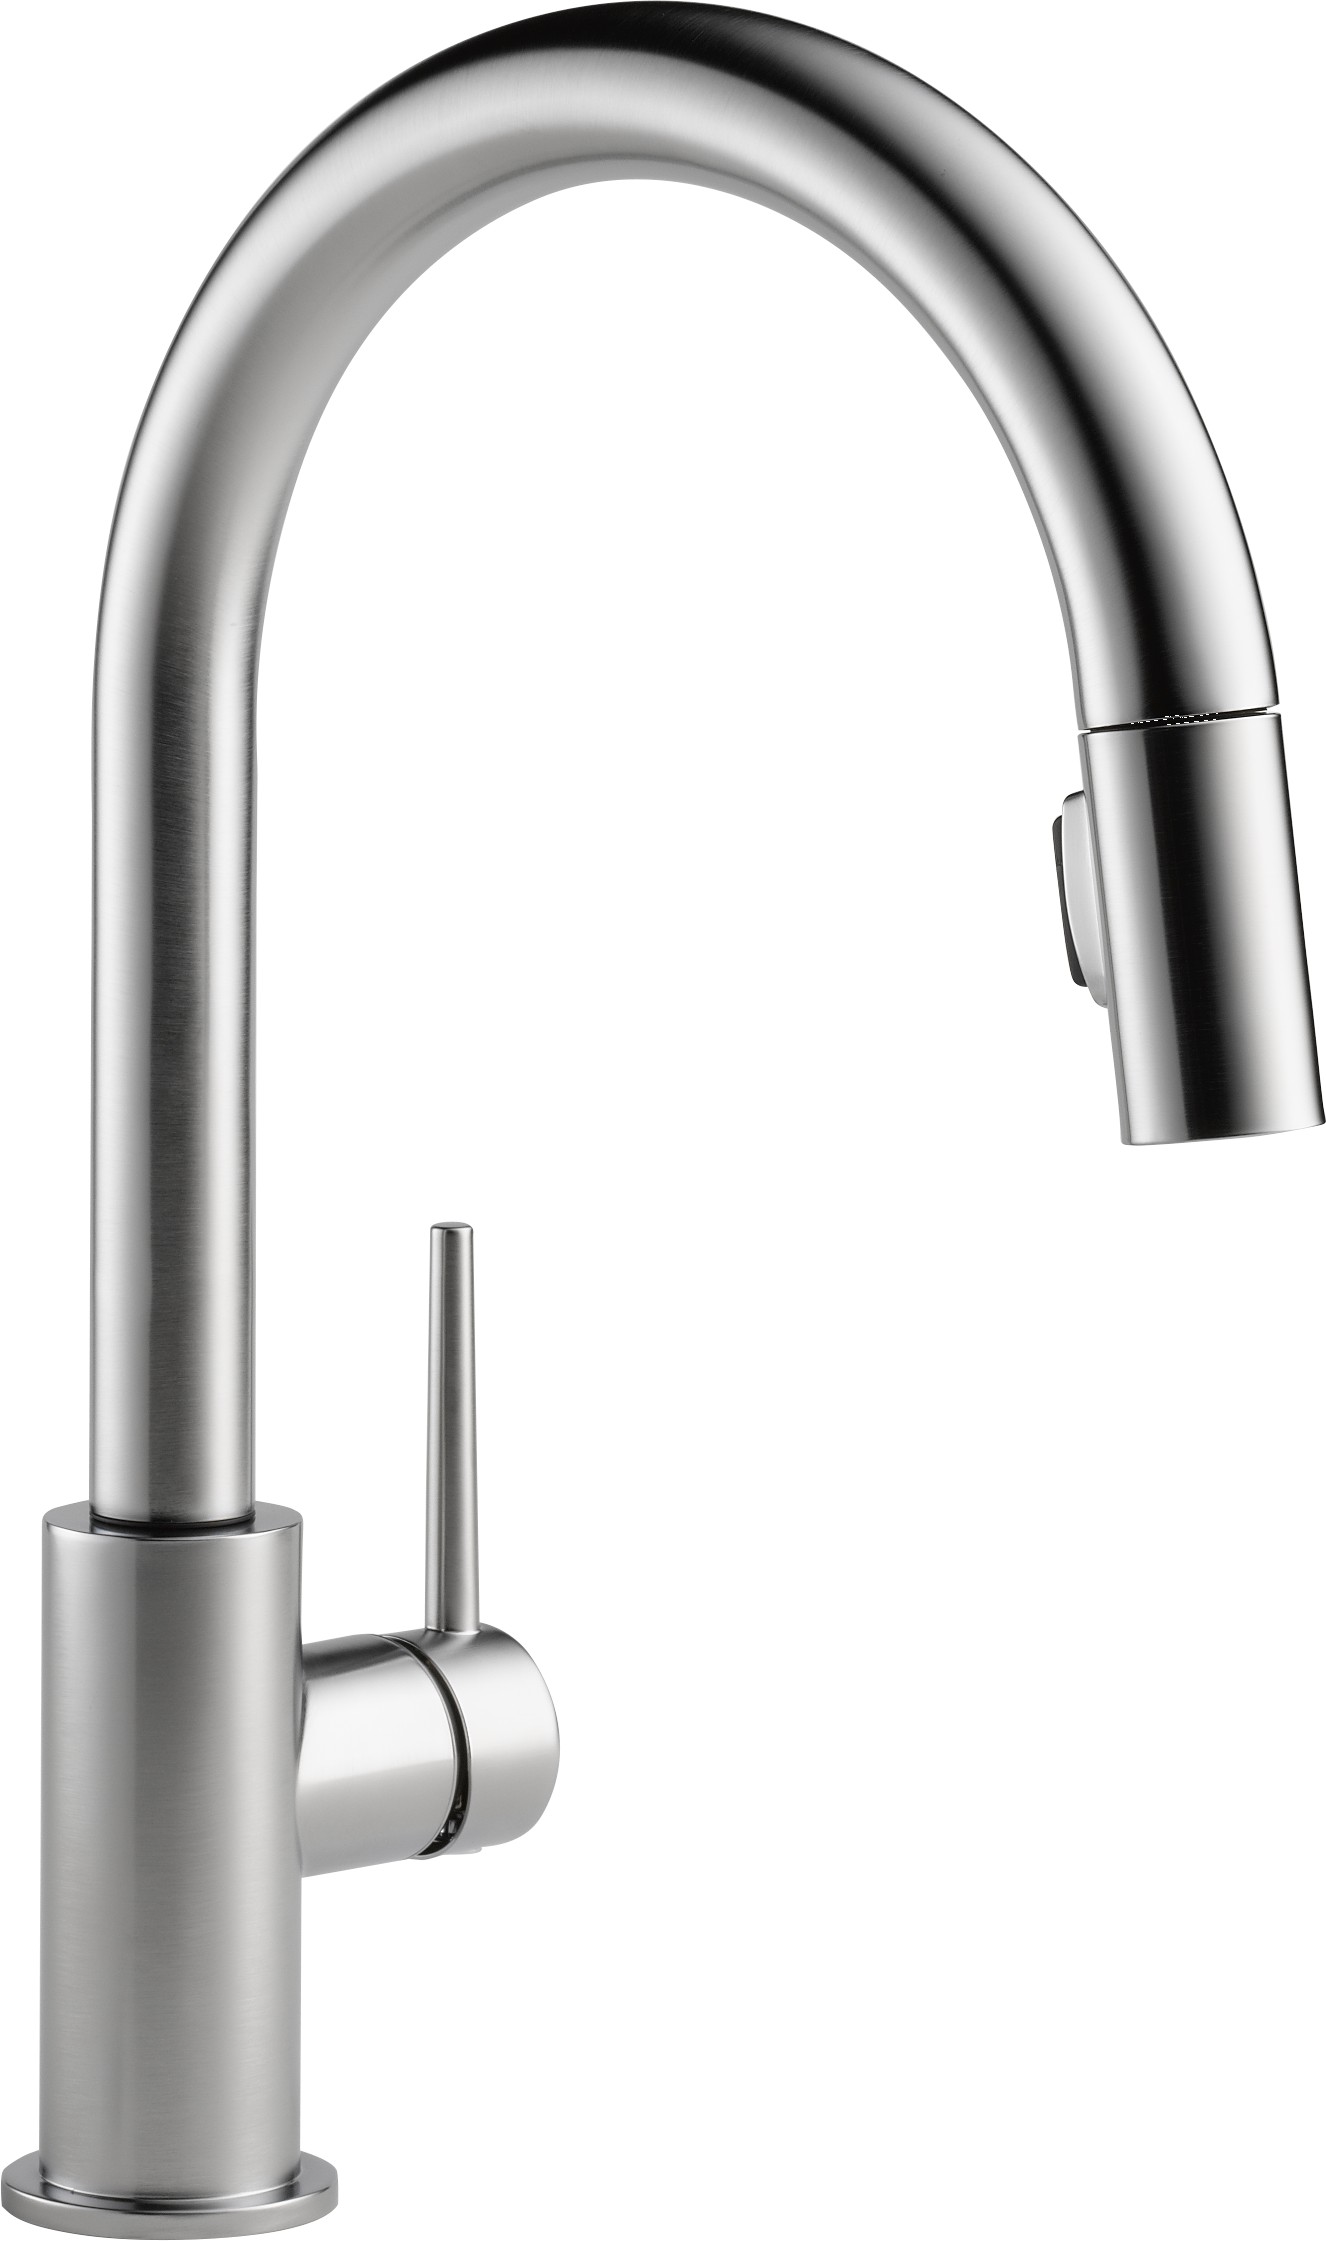 Delta-Delex-Brizo | 9159-AR-DST | DELTA 9159-AR-DST PULL-DOWN FAUCET 1H ARCTIC STAINLESS